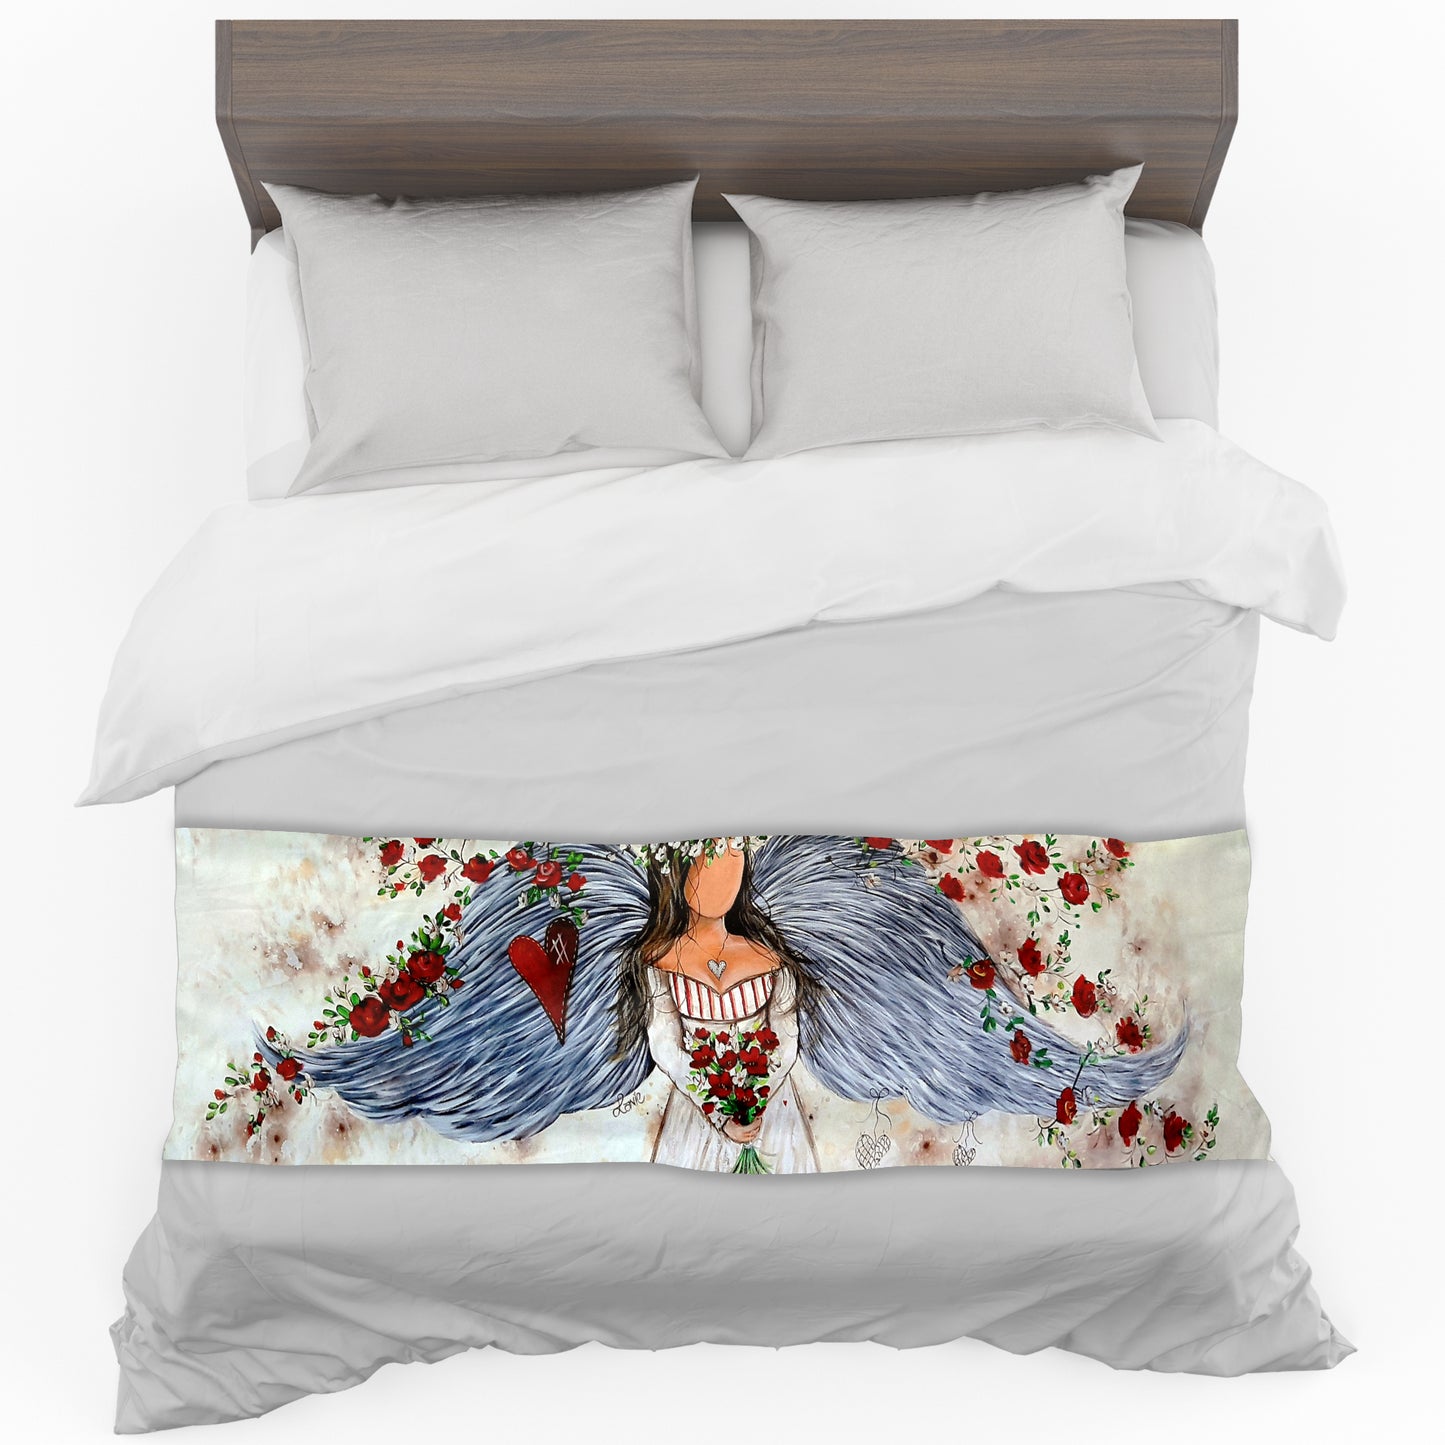 Blue Wing Angel By Lanie Wolvaardt Bed Runner and Optional Pillowcases